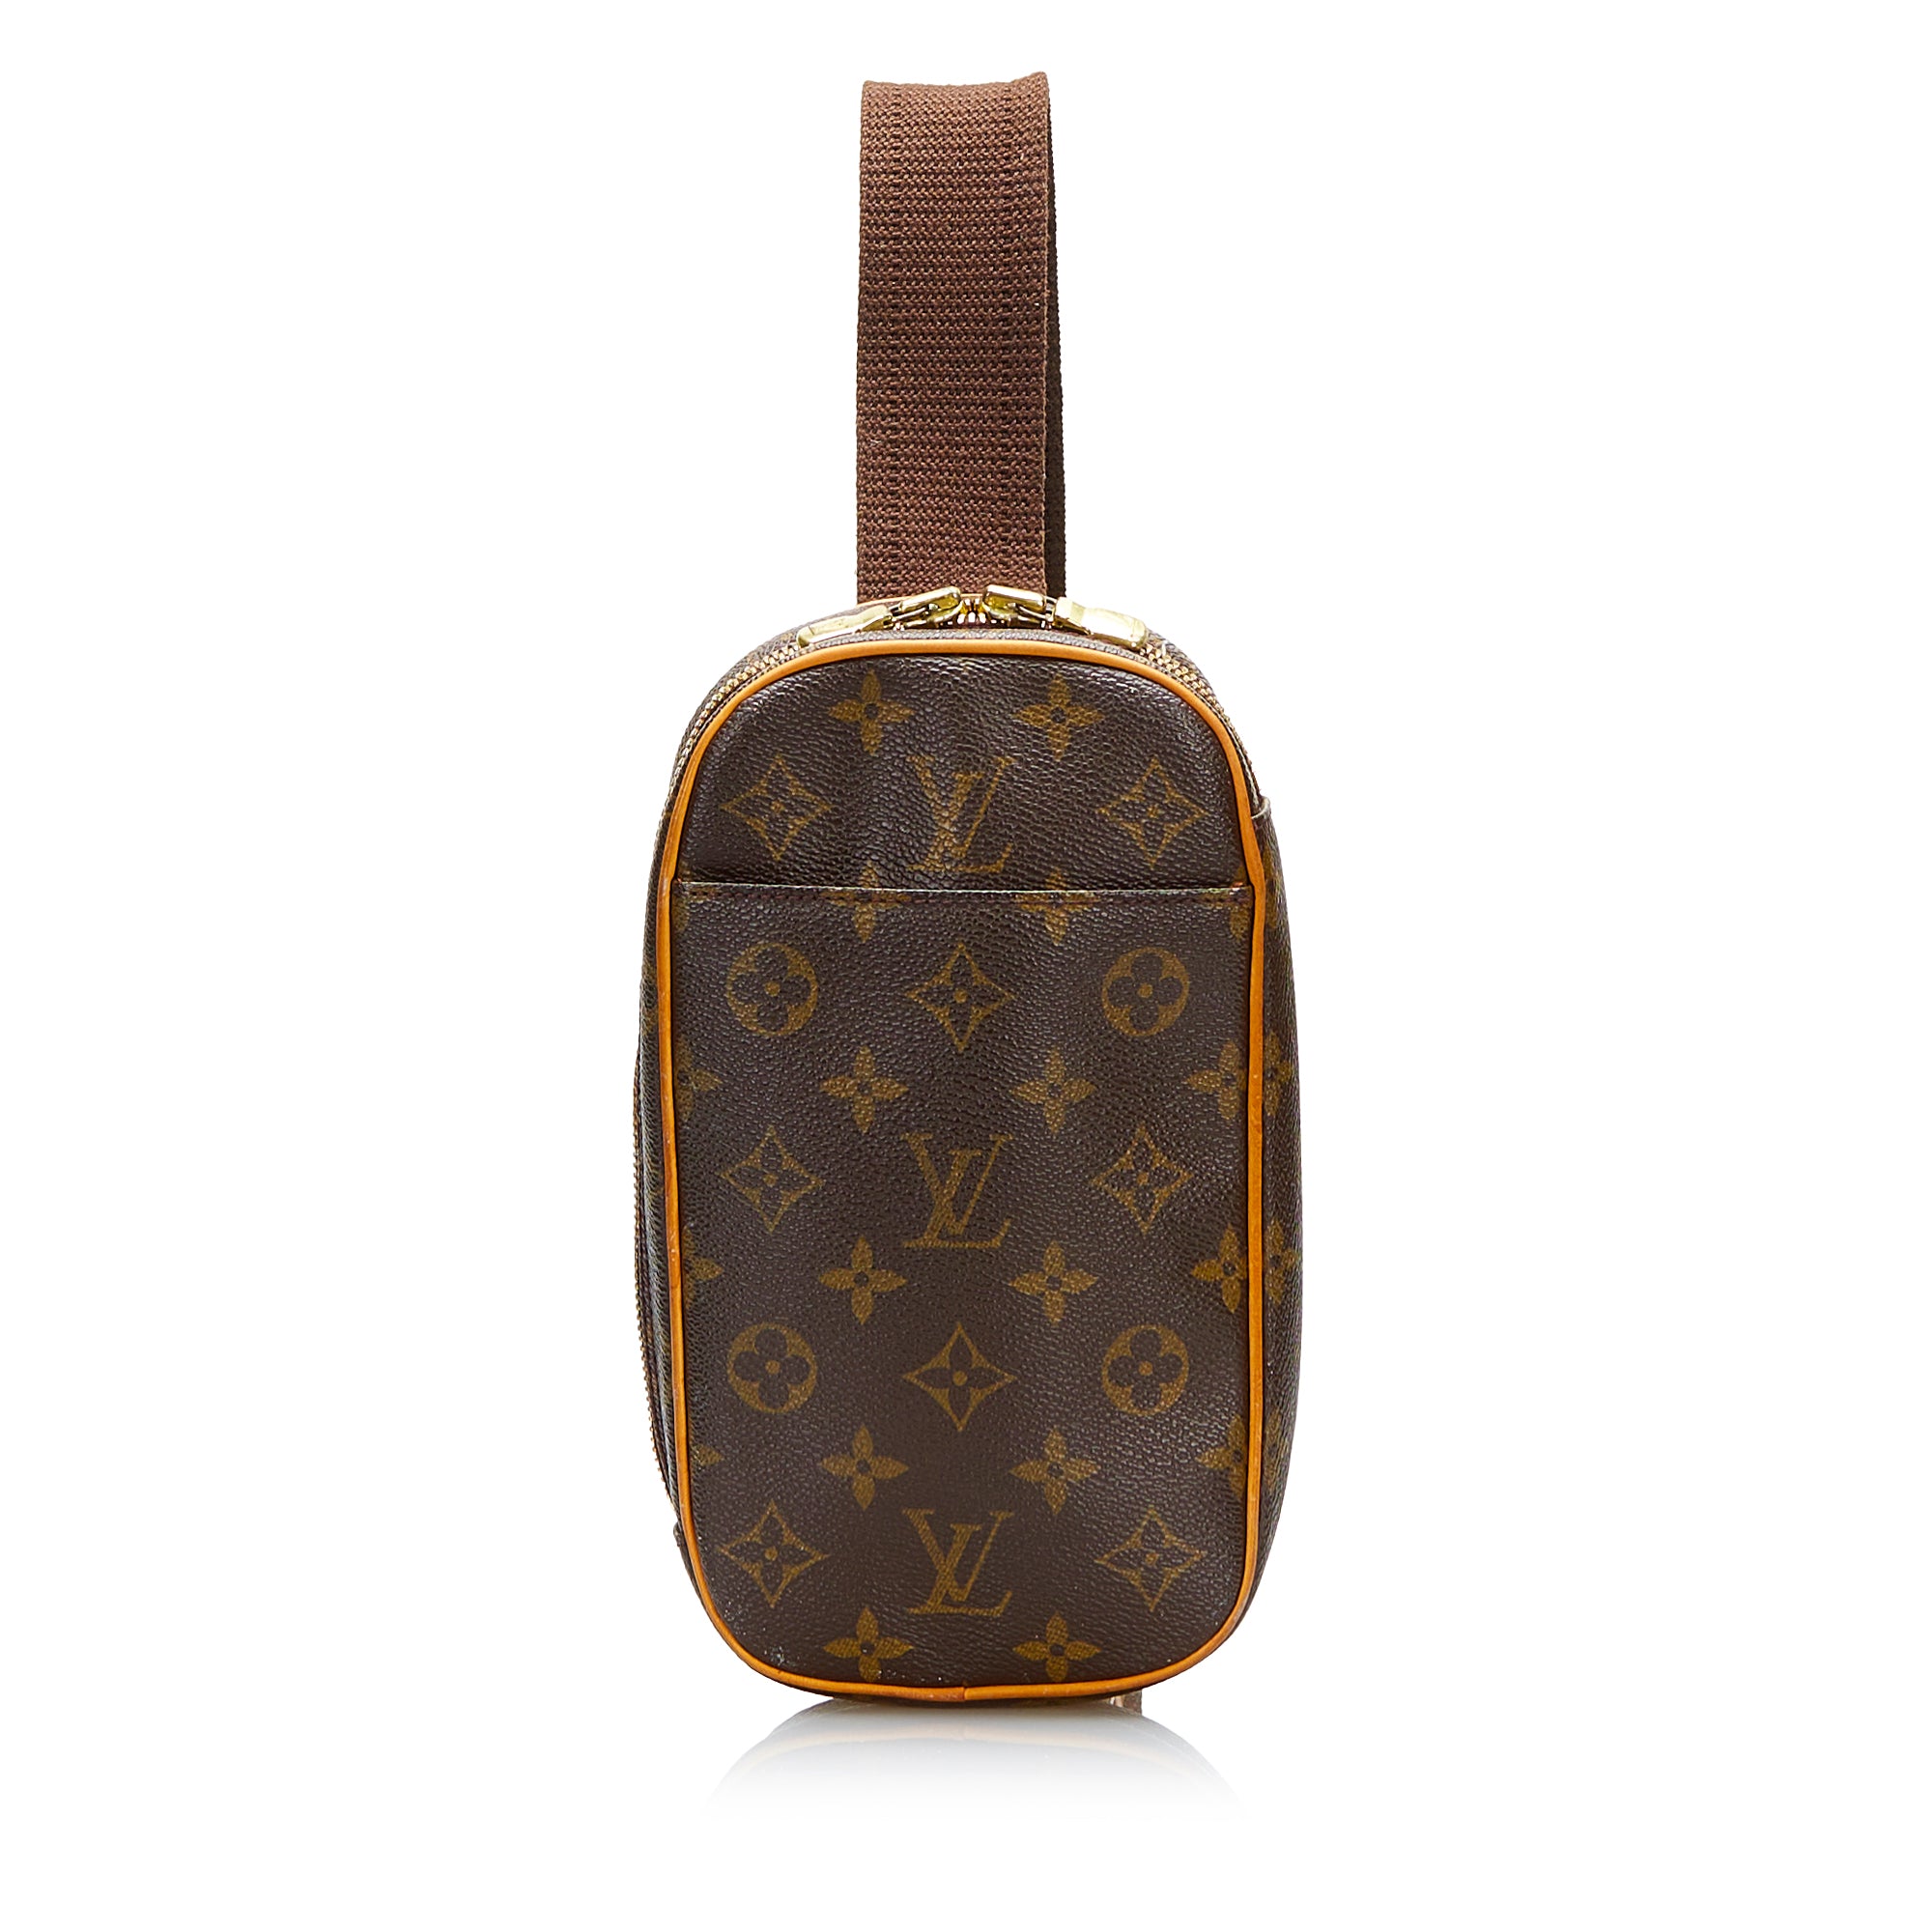 Shop for Louis Vuitton Monogram Canvas Leather Gange Crossbody / Waist Bag  - Shipped from USA